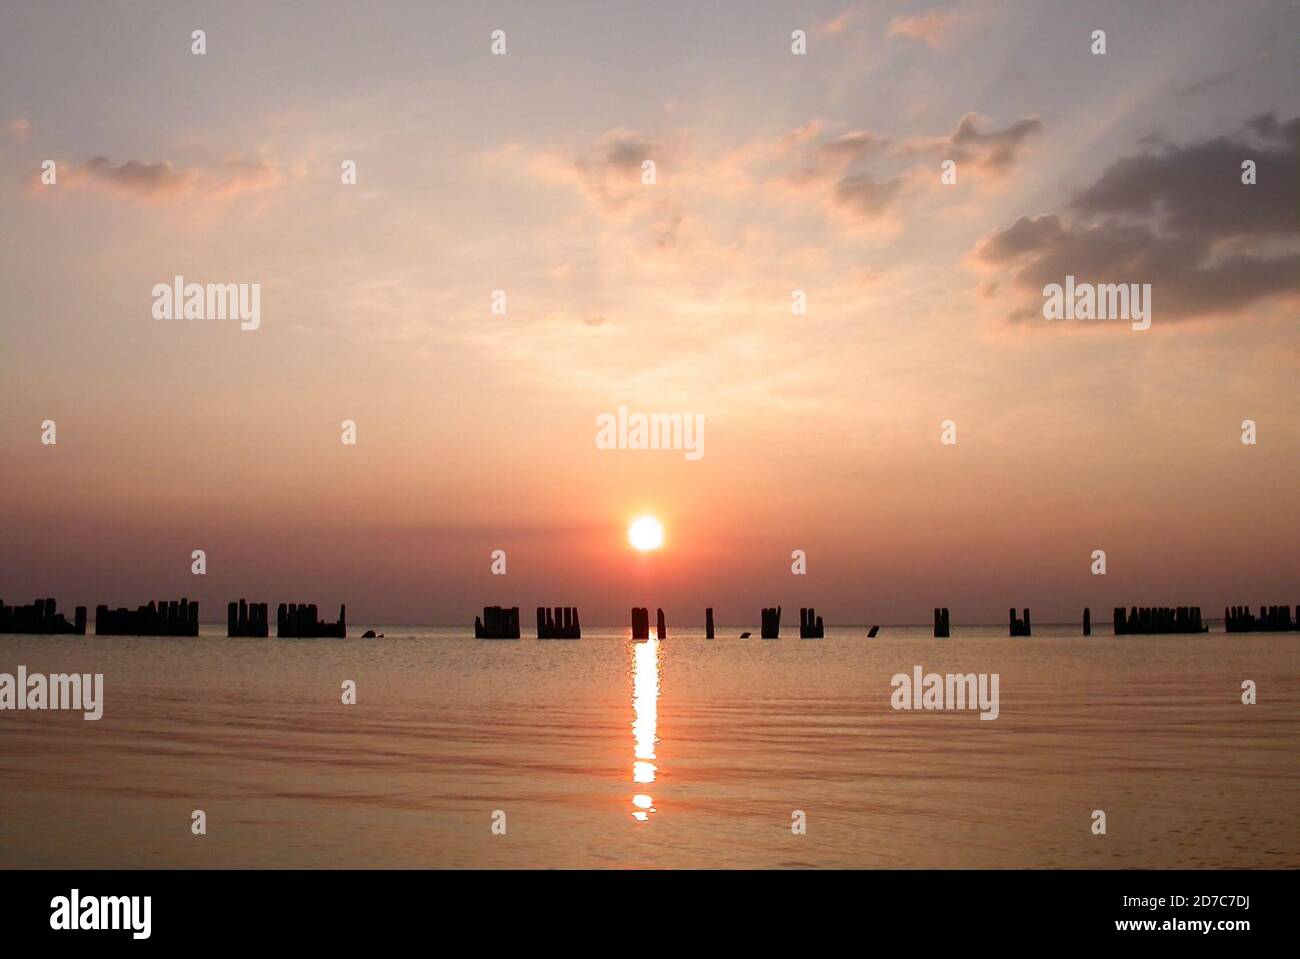 Sunset view of hurricane damaged pier pilings in southern Louisiana USA. Stock Photo